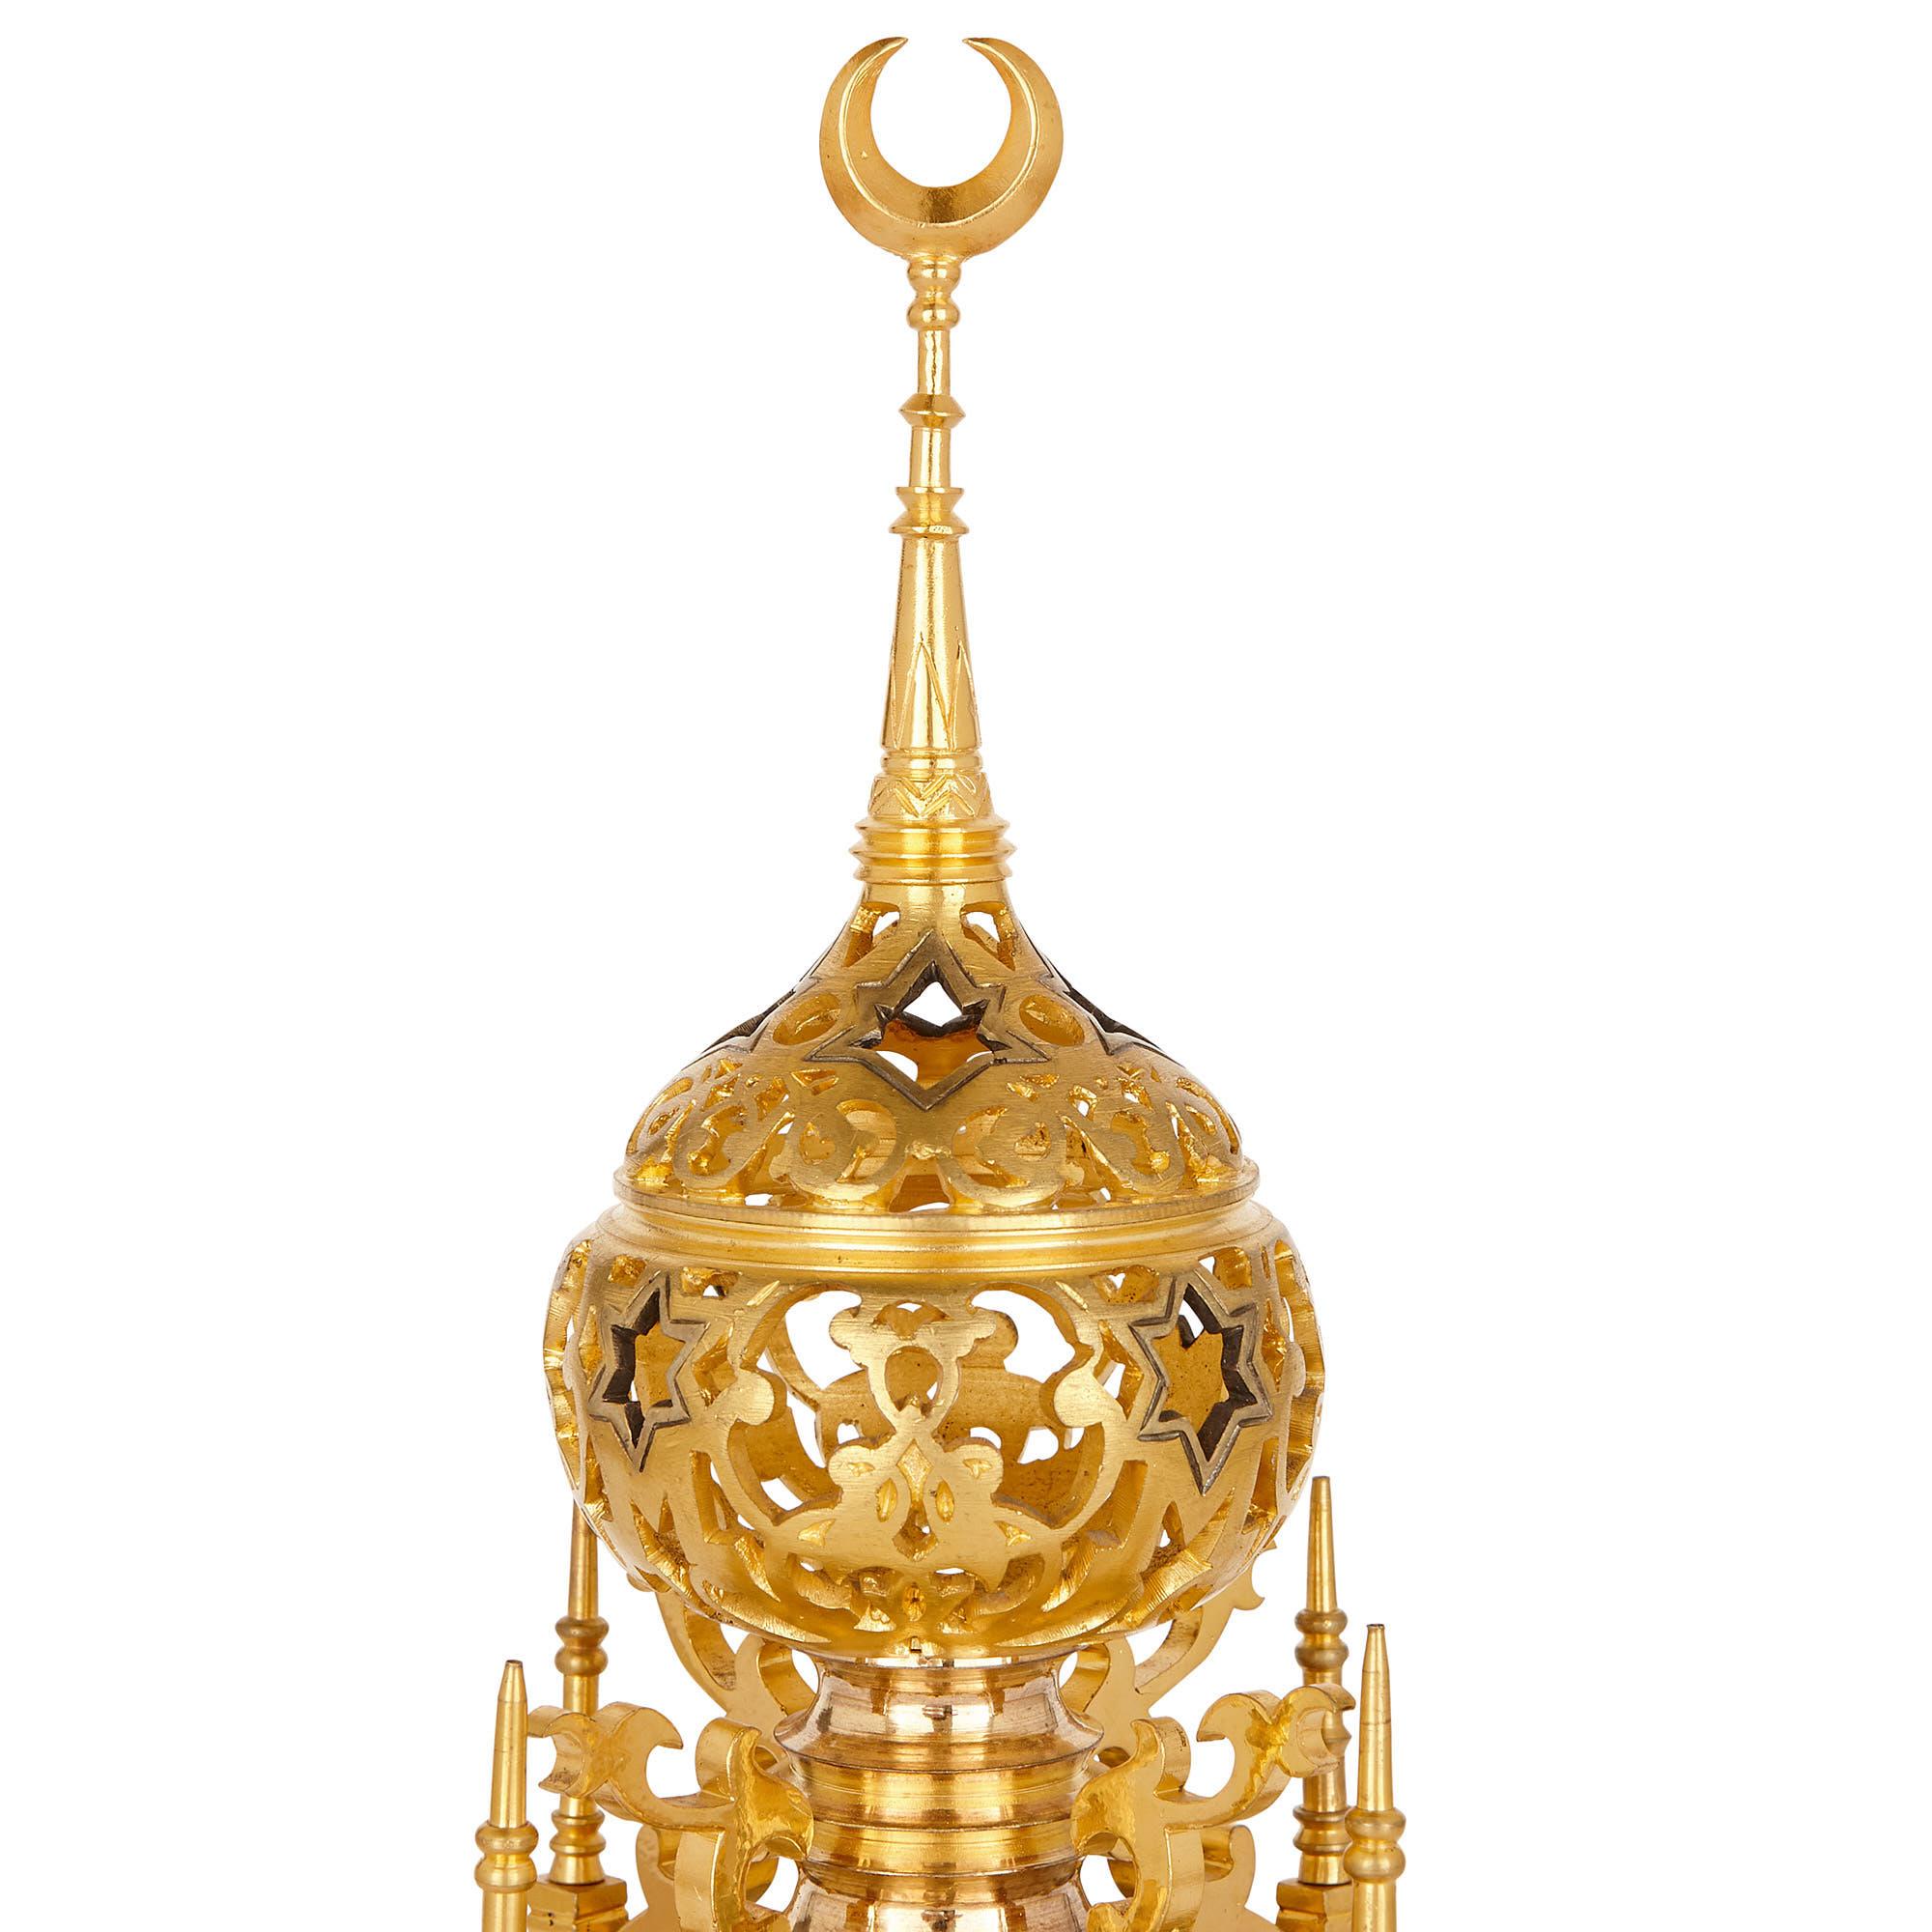 French Antique Islamic Style Silvered and Gilt Bronze Clock by Charles Oudin